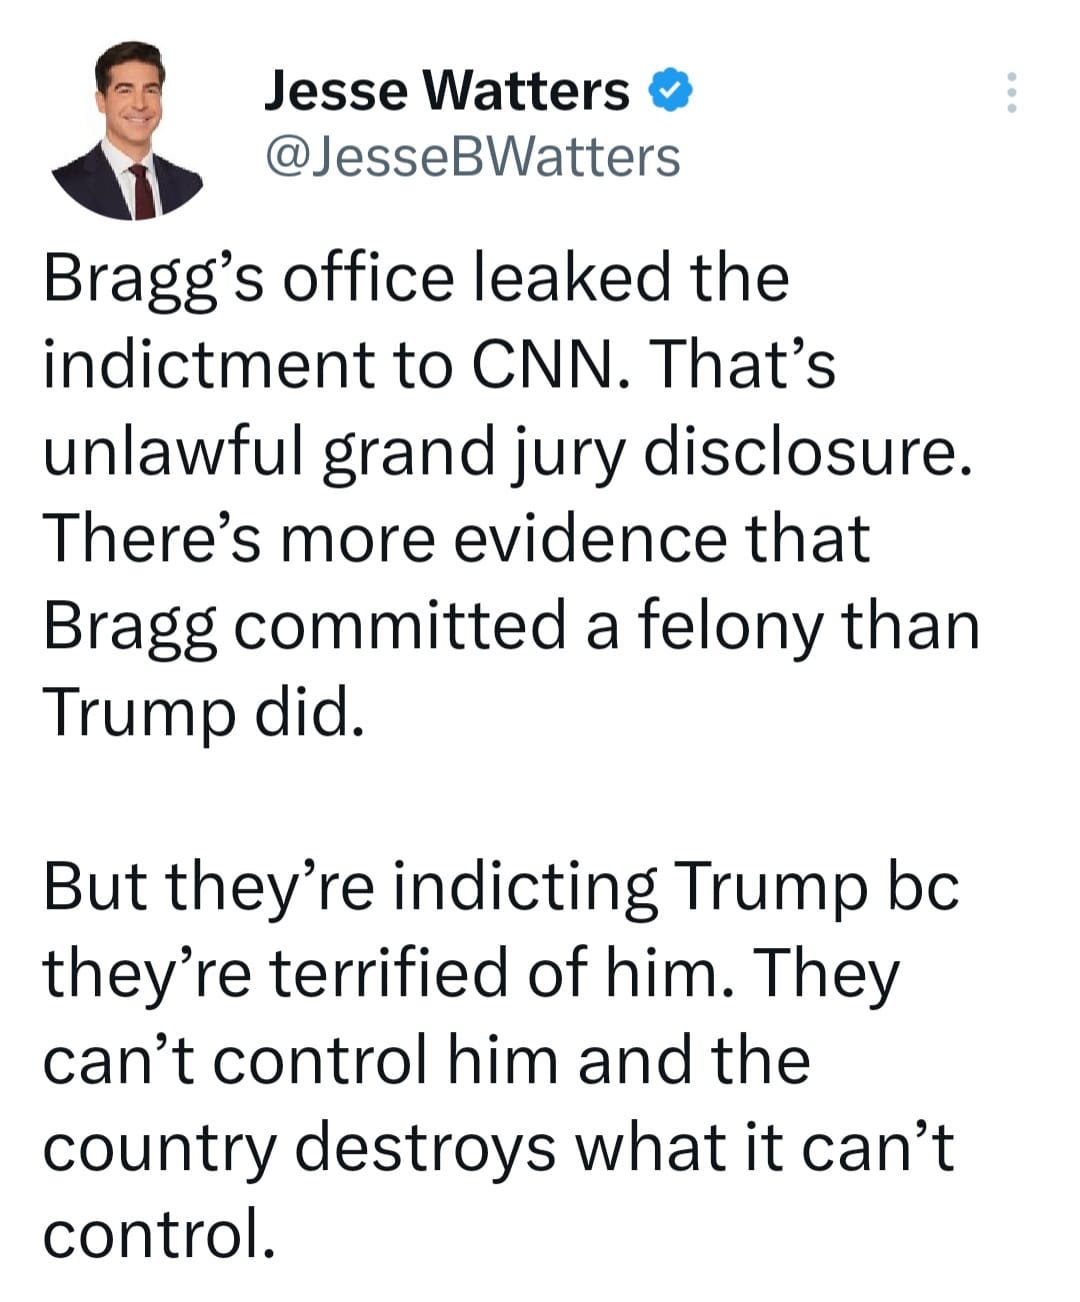 May be a cartoon of 1 person, standing and text that says 'Jesse Watters @JesseBWatters Bragg's office leaked the indictment to to CNN. That's unlawful grand jury disclosure. There's more evidence that Bragg committed a felony than Trump did. But they're indicting Trump bc they're terrified of him. They can't control him and the country destroys what it can't control.'